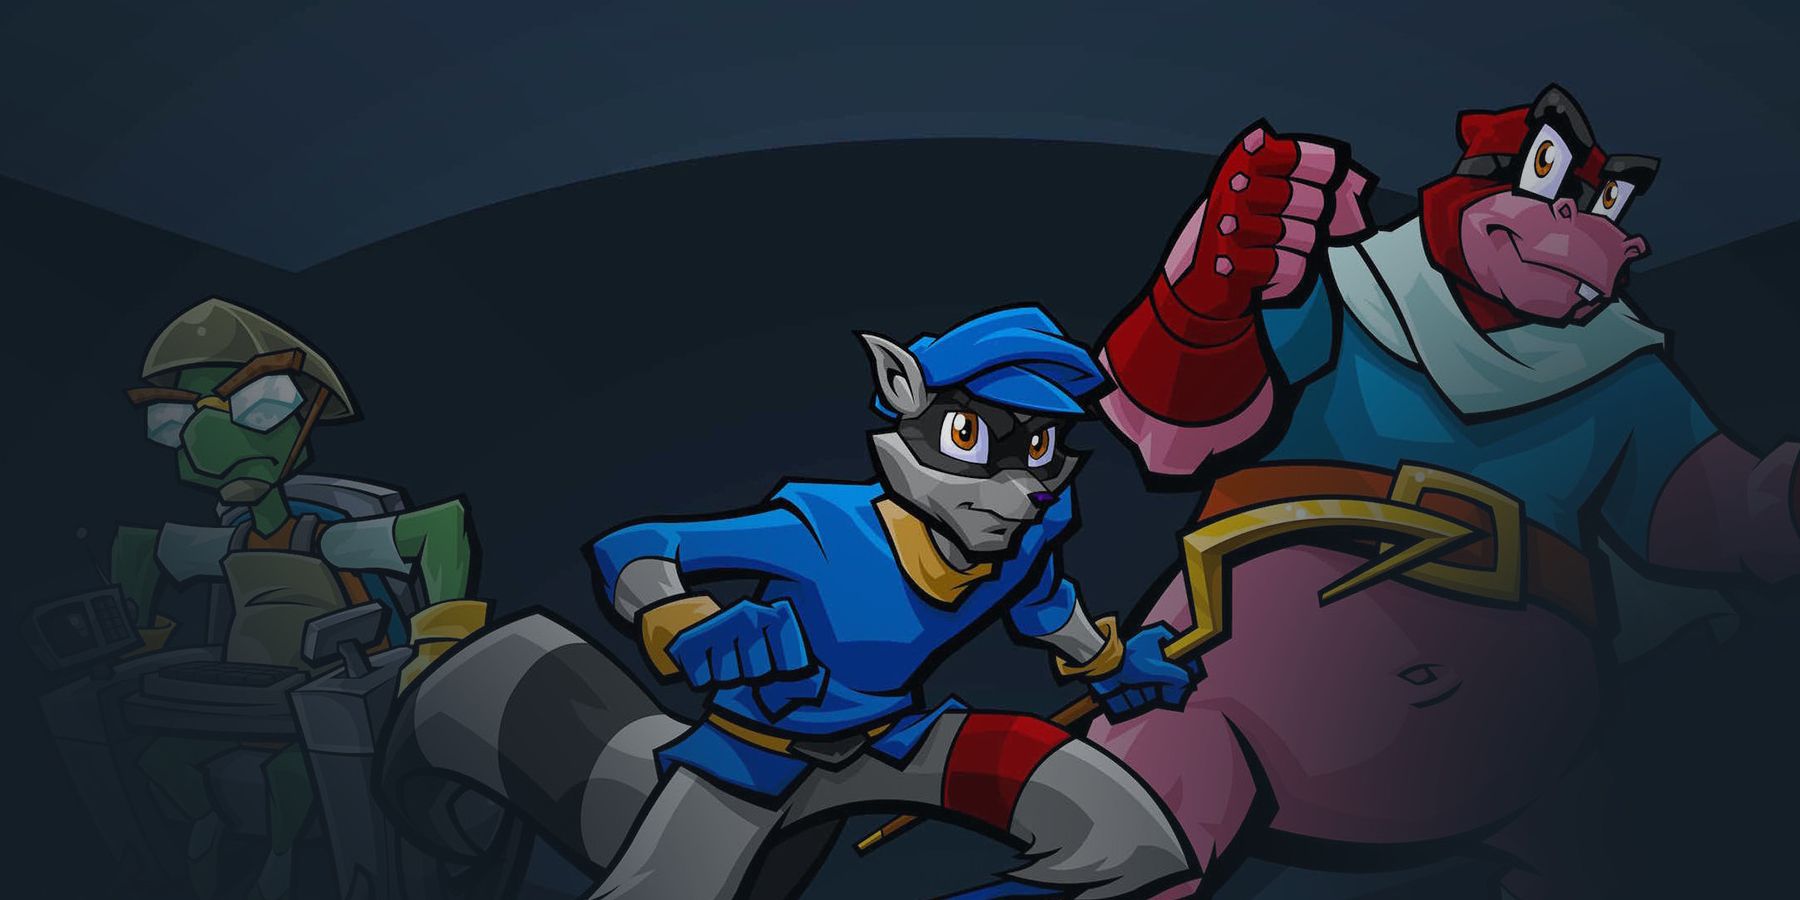 Sly Cooper Collection